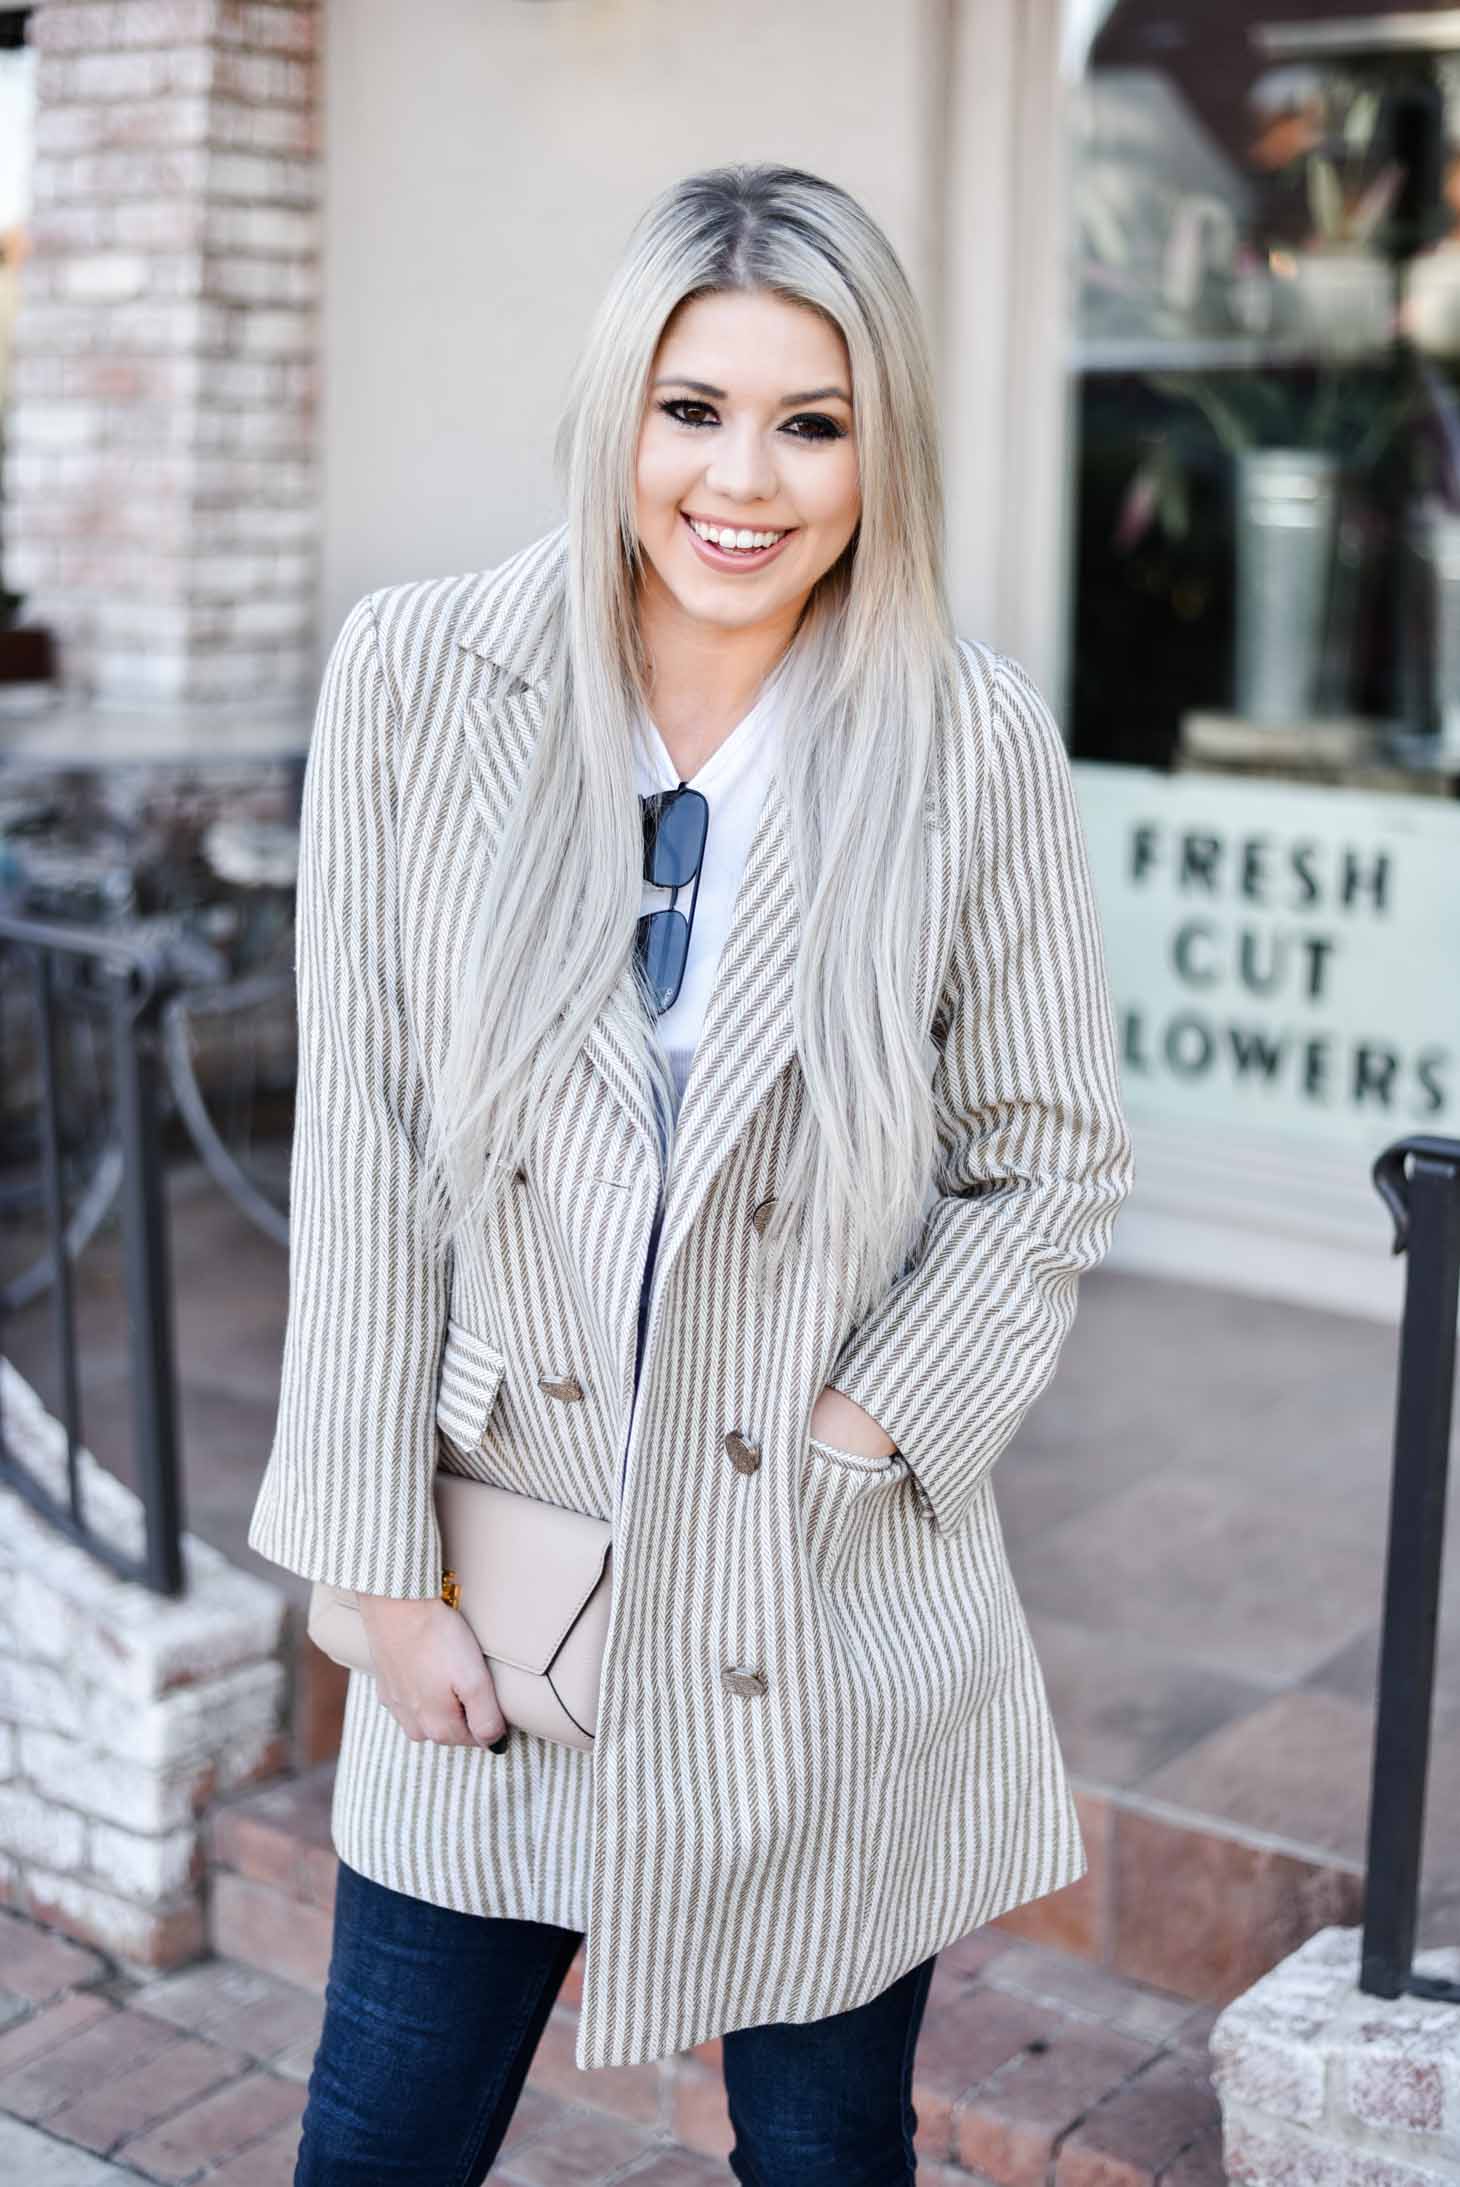 Erin Elizabeth of Wink and a Twirl shares the perfect oversized blazer from Chicwish